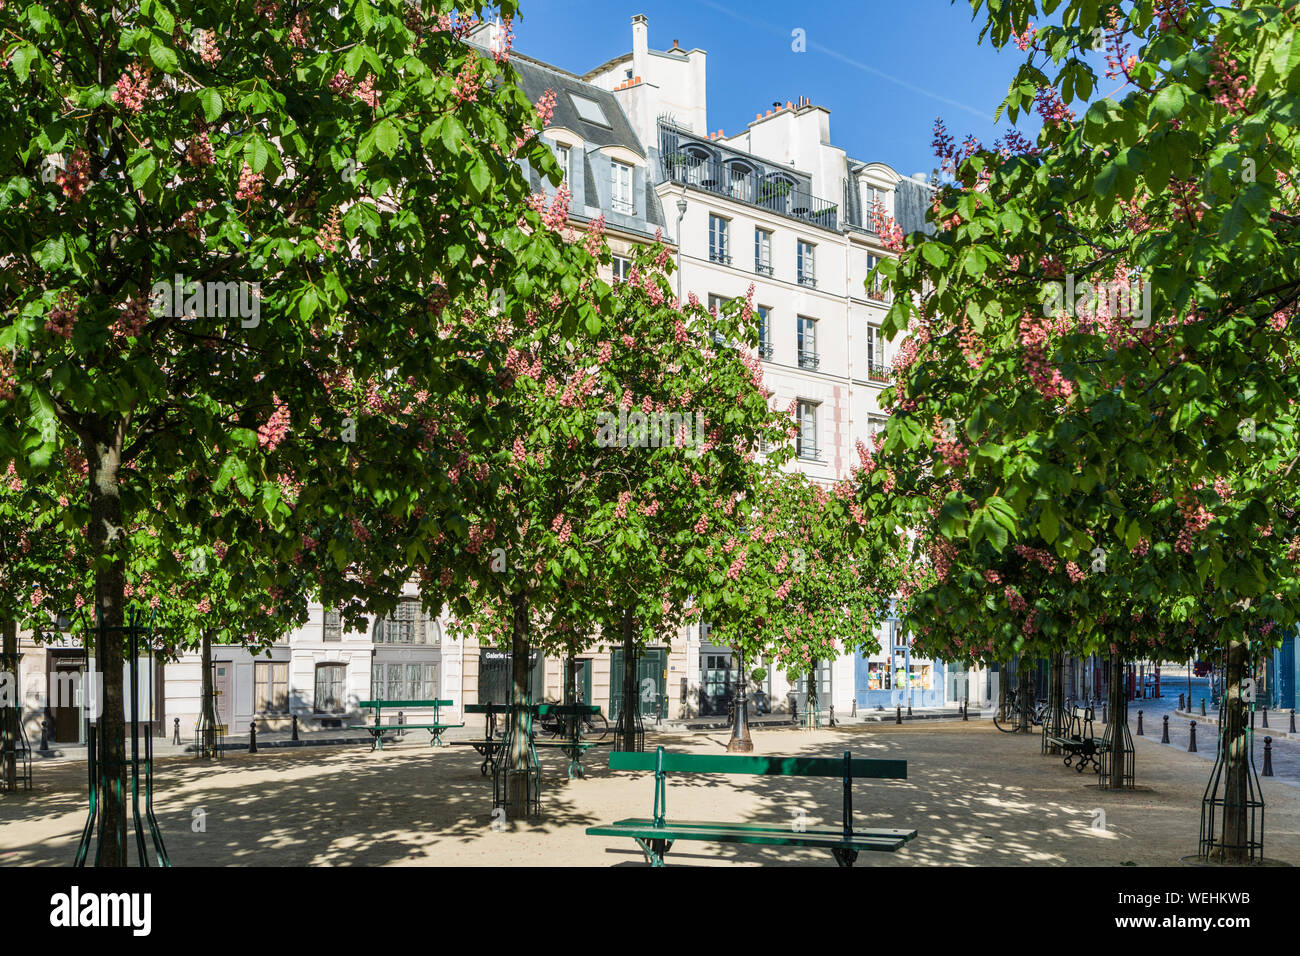 Chestnut trees in bloom in Place Dauphine, Paris, France Stock Photo